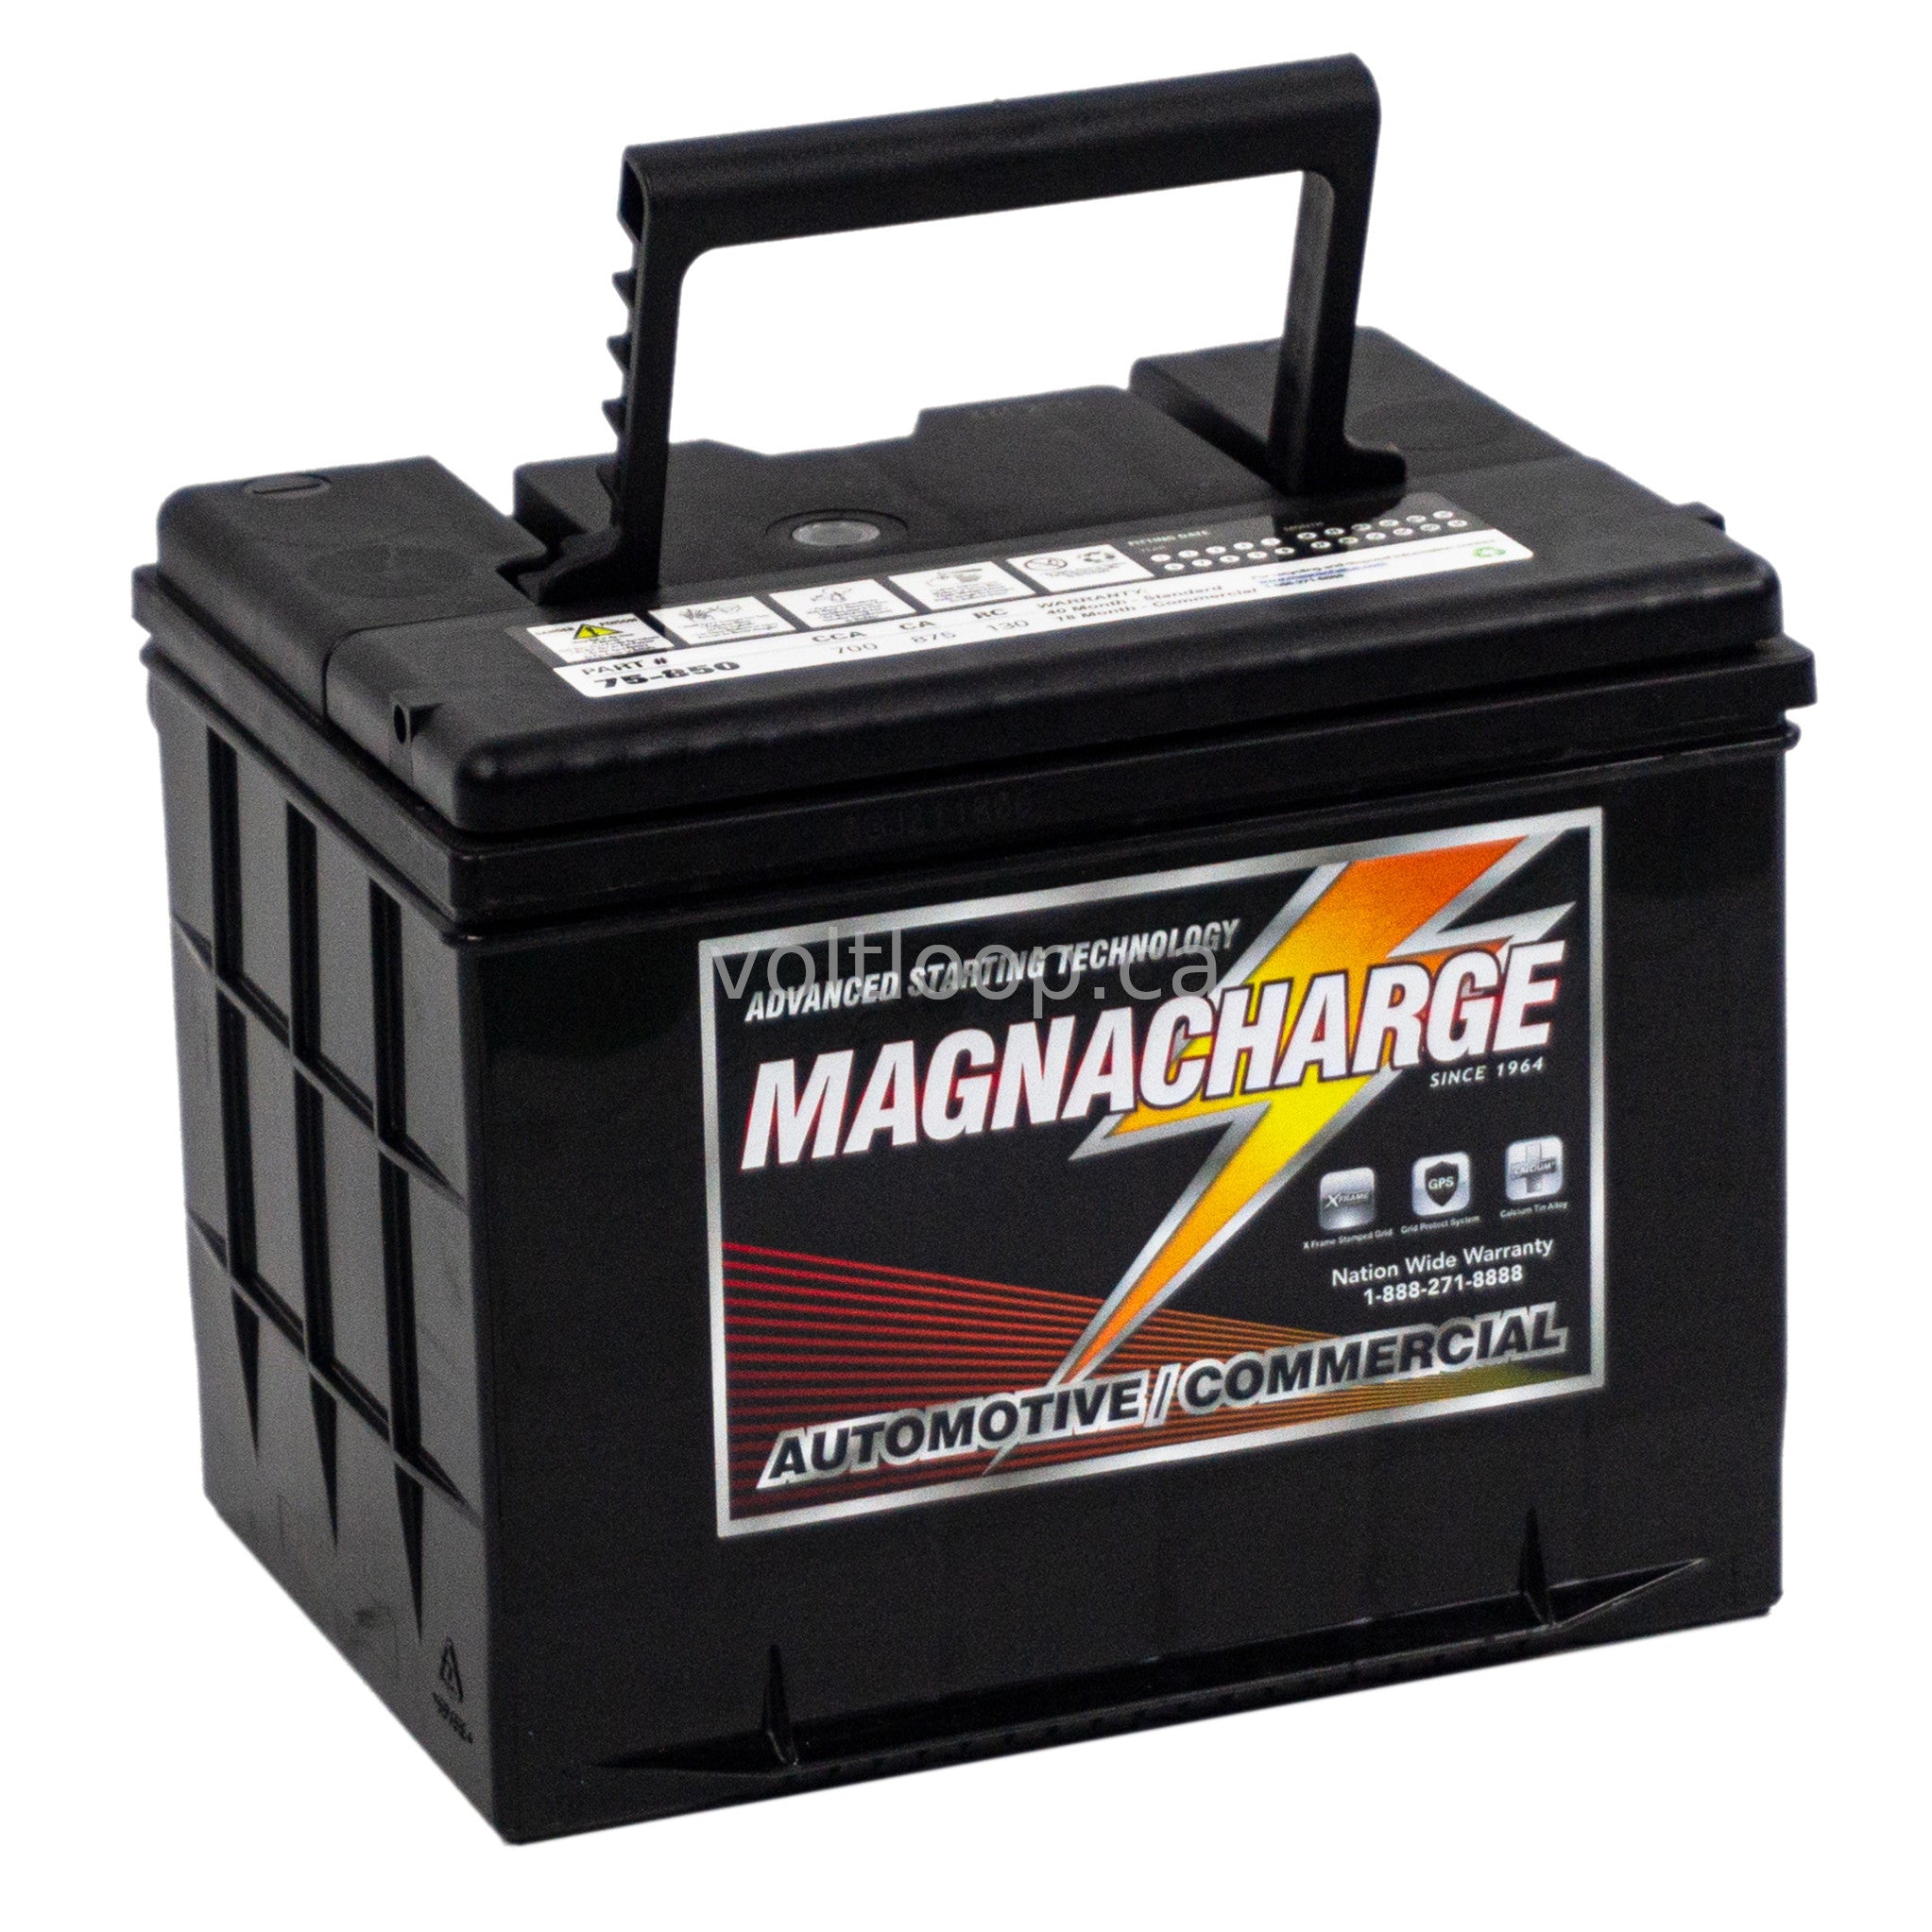 Magnacharge 75-850 Group 75 Car Battery